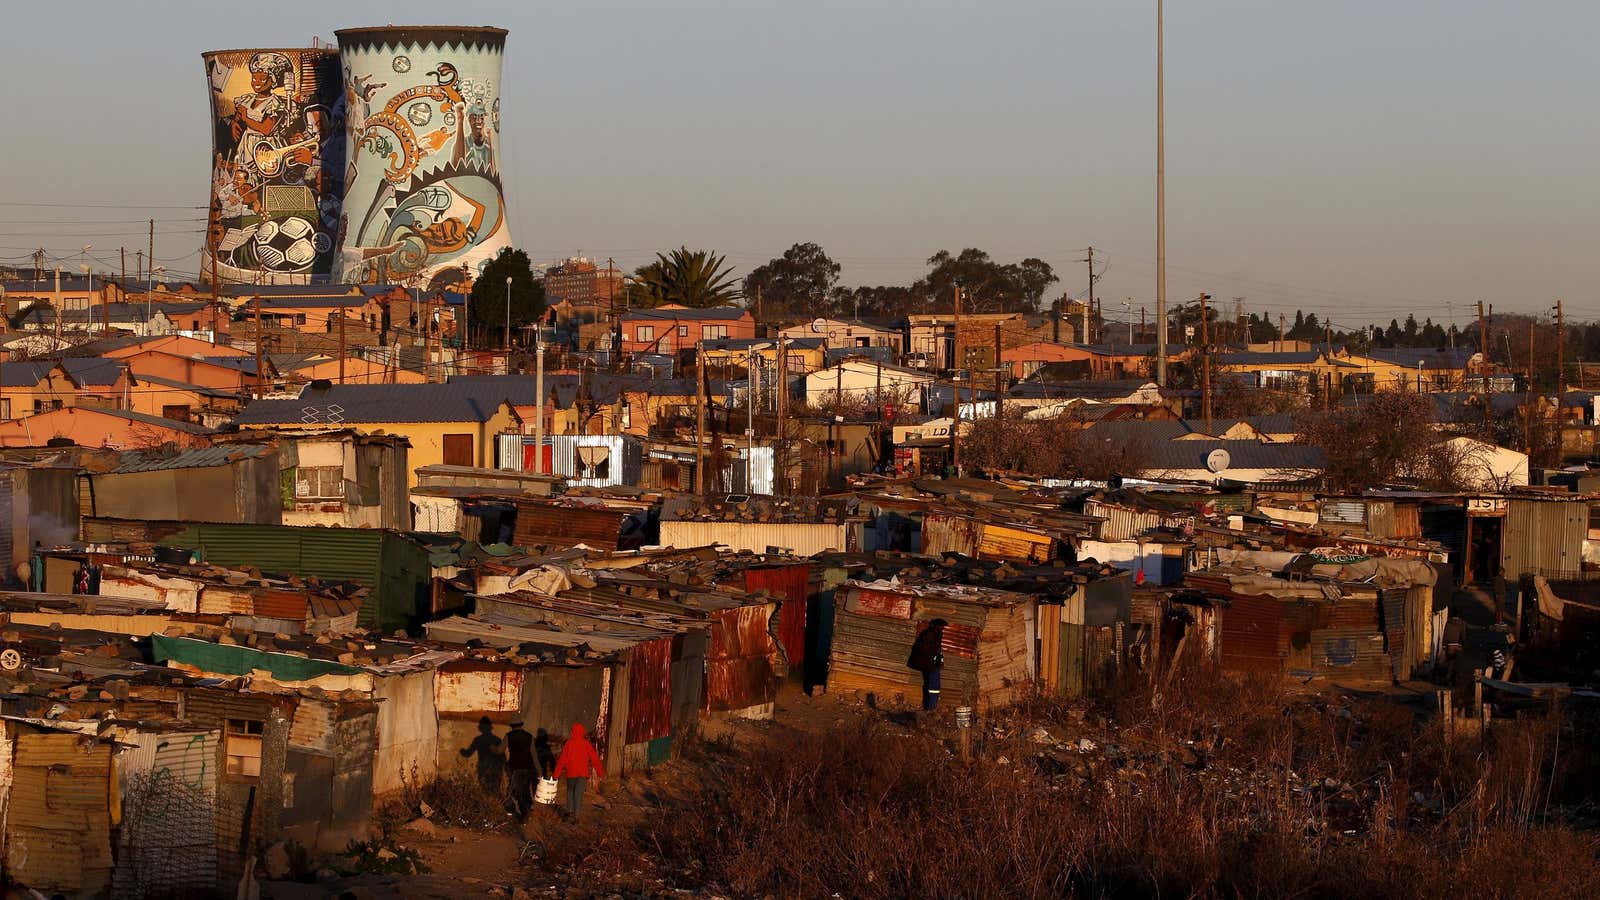 Unused cooling towers are seen overlooking an informal settlement in Soweto, South Africa